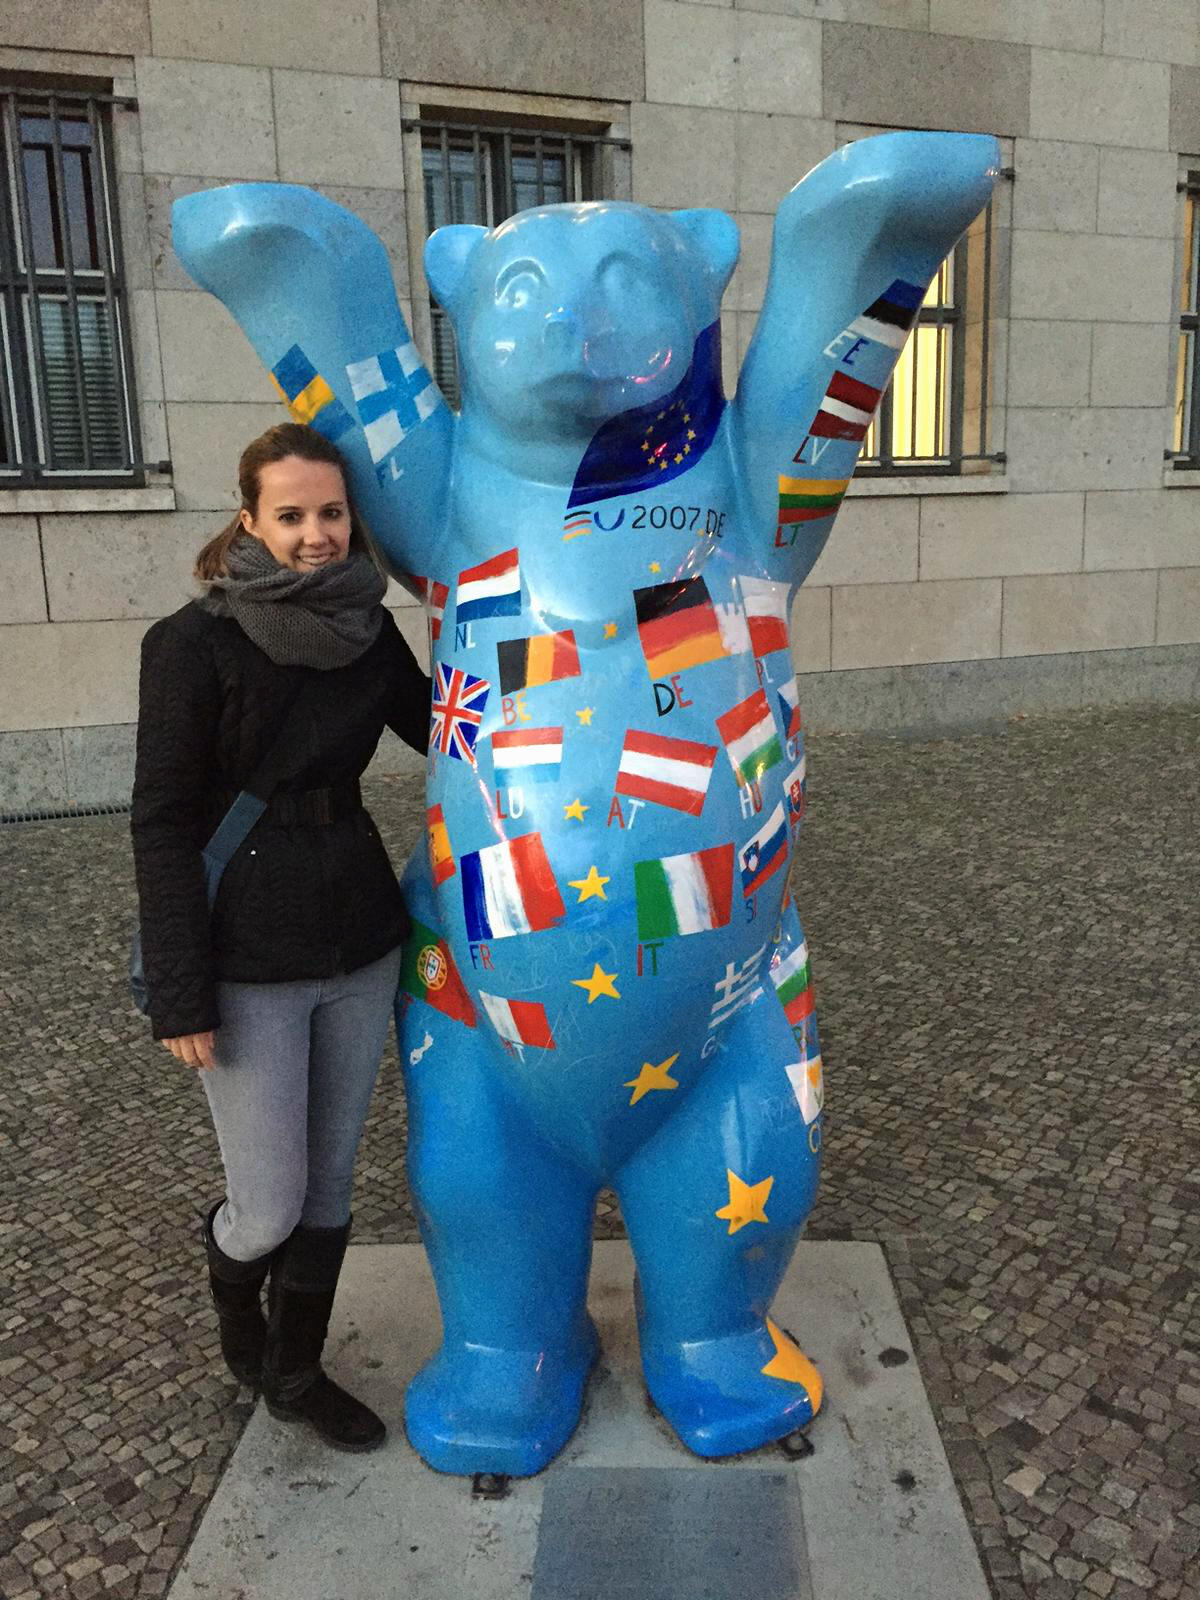 Sarah Carrier with a "Buddy Bear," painted with the flags of the European Union, in Berlin, Germany.